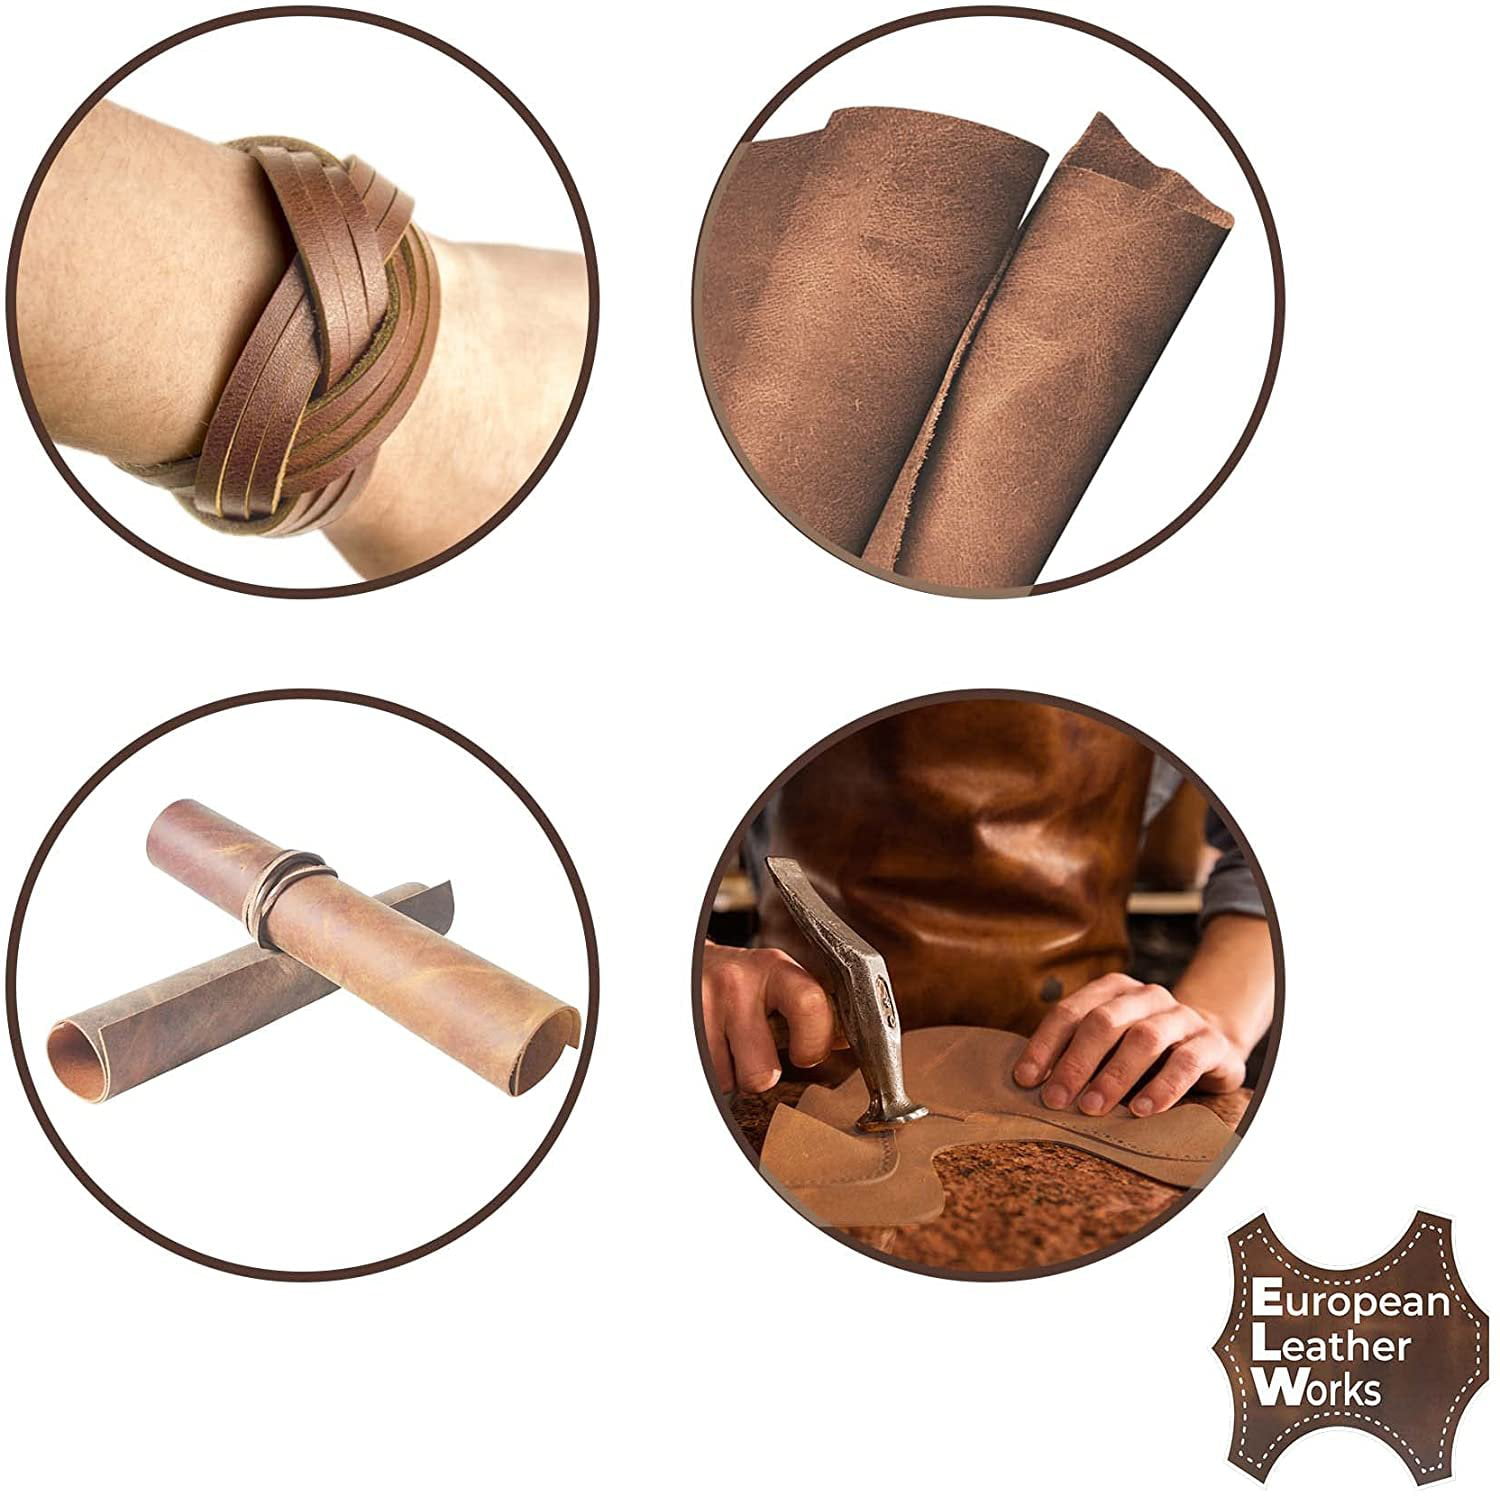 European Leather Work 9-10 oz. (3.6-4mm) Oil-Tanned Leather Scraps Bou–